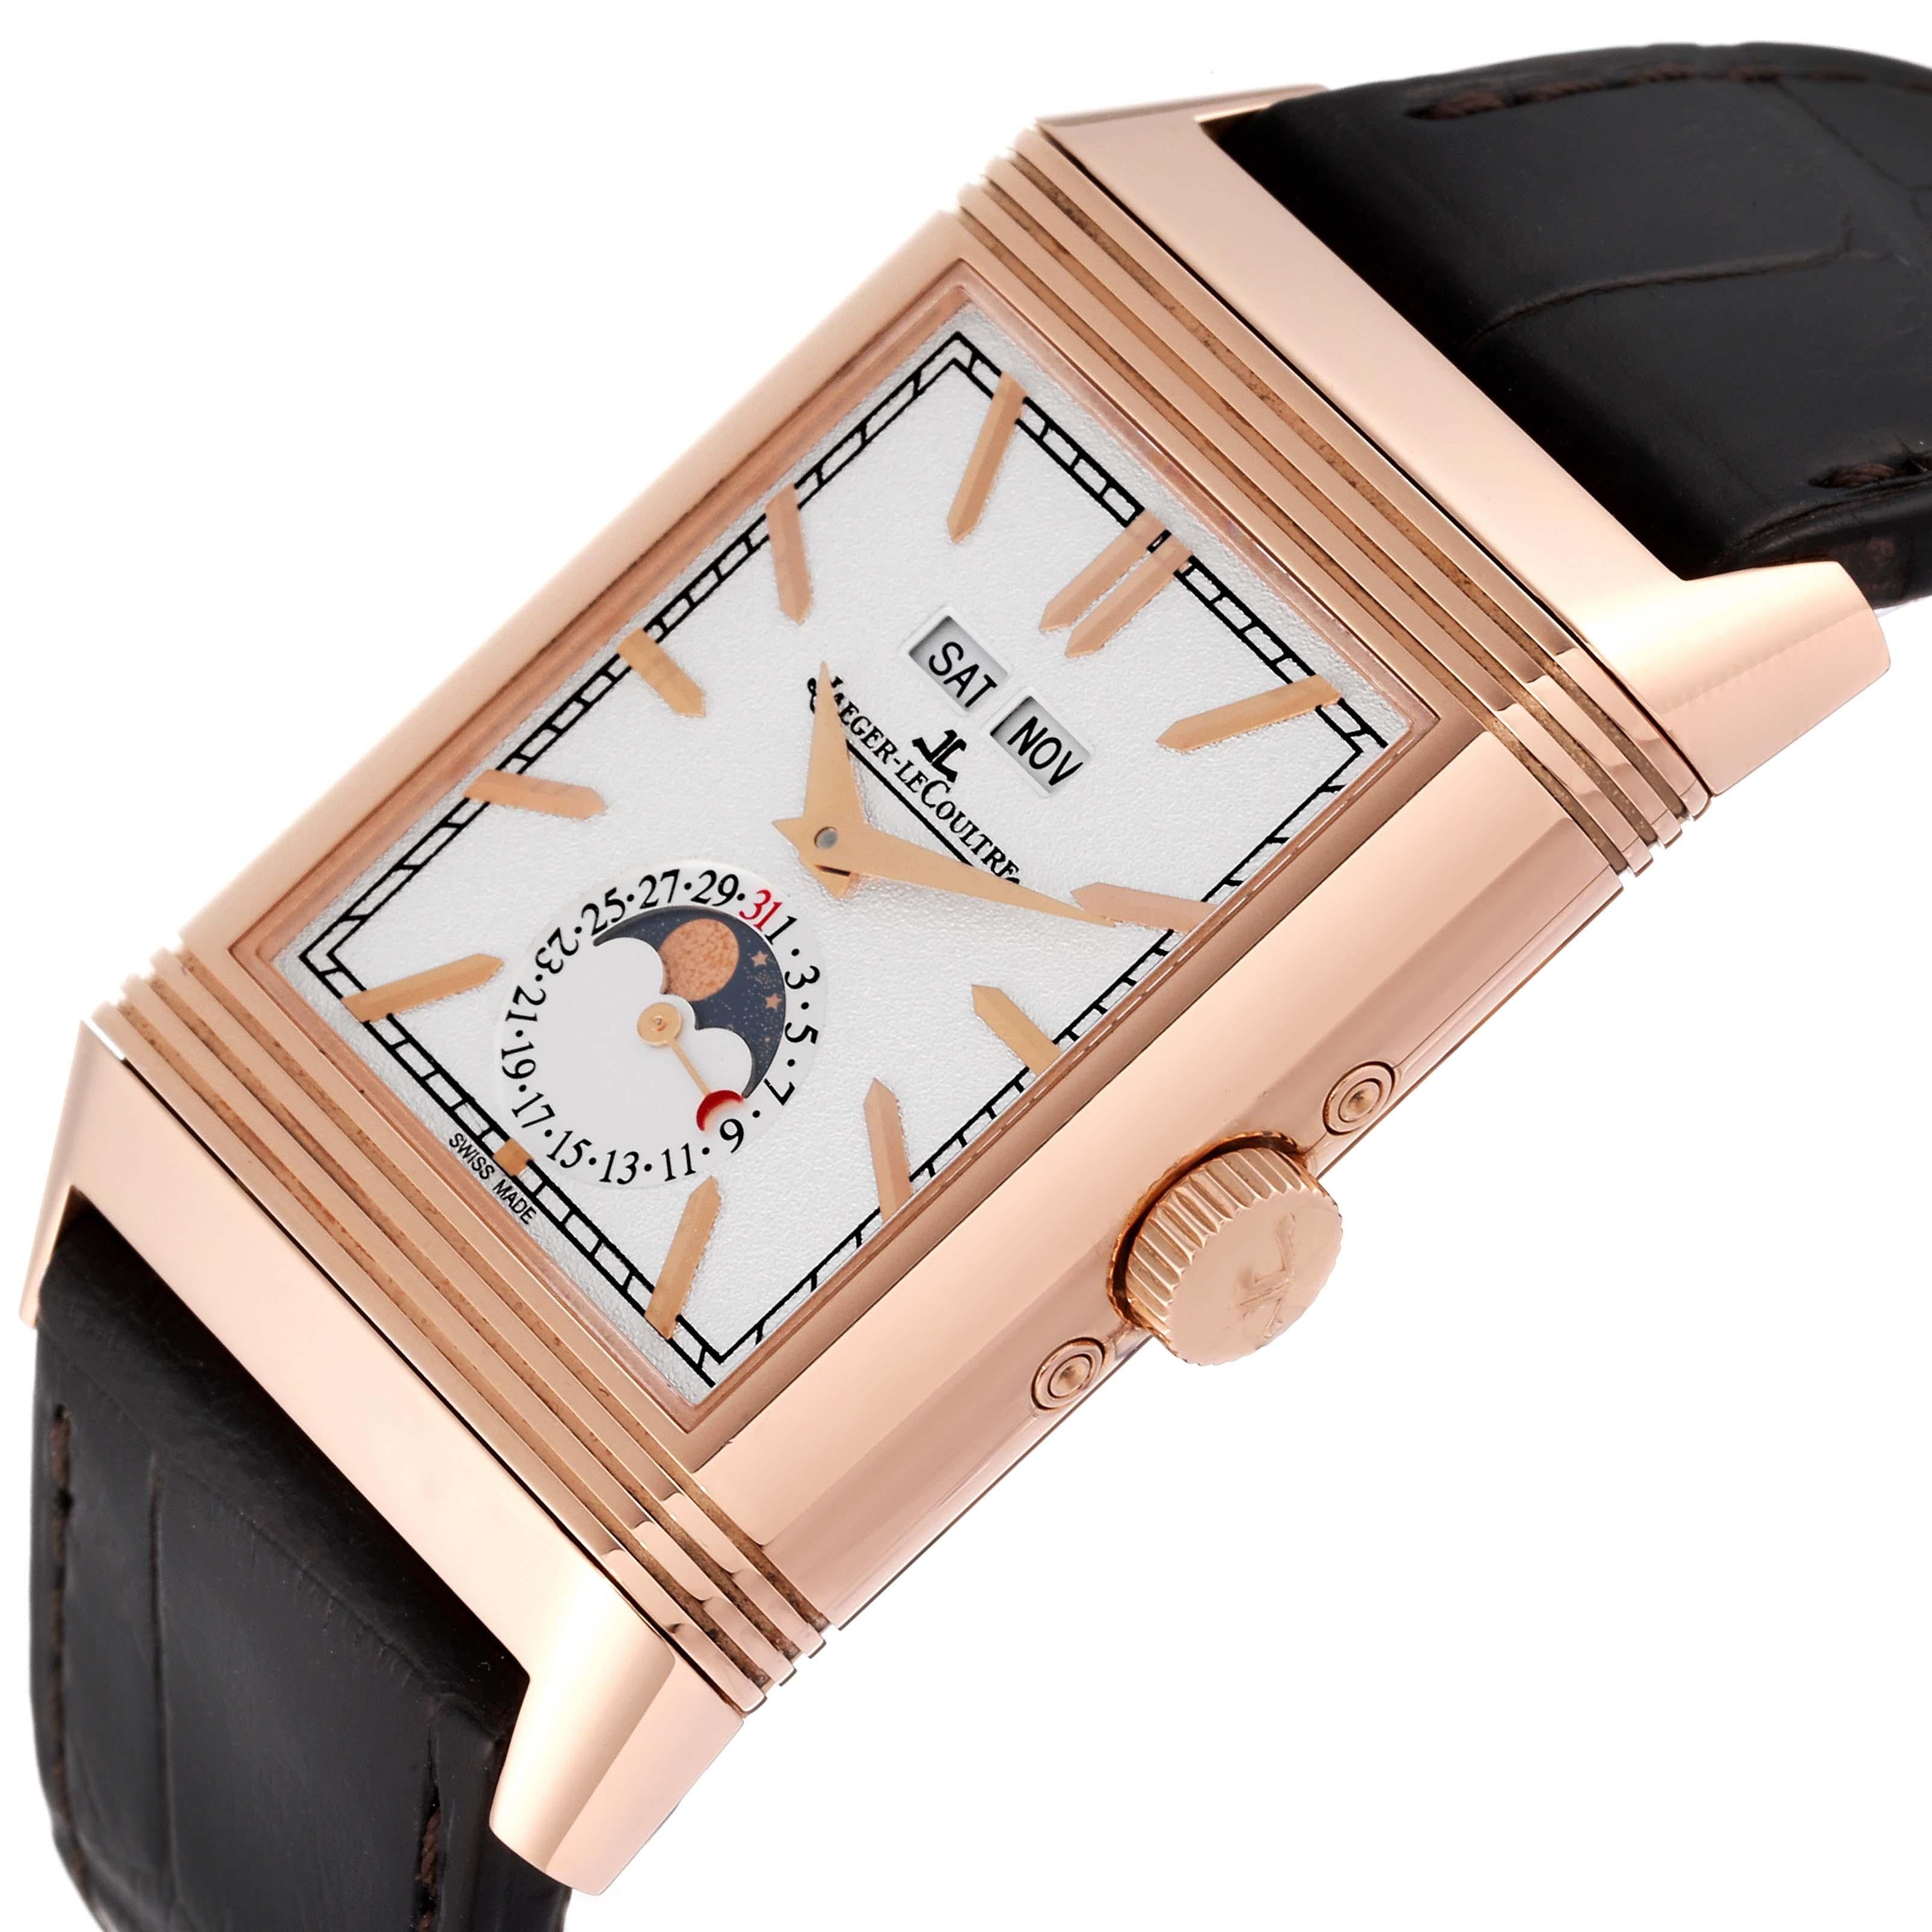 Jaeger LeCoultre Reverso Tribute Duoface Rose Gold Mens Watch Q3912420 Box Card 1